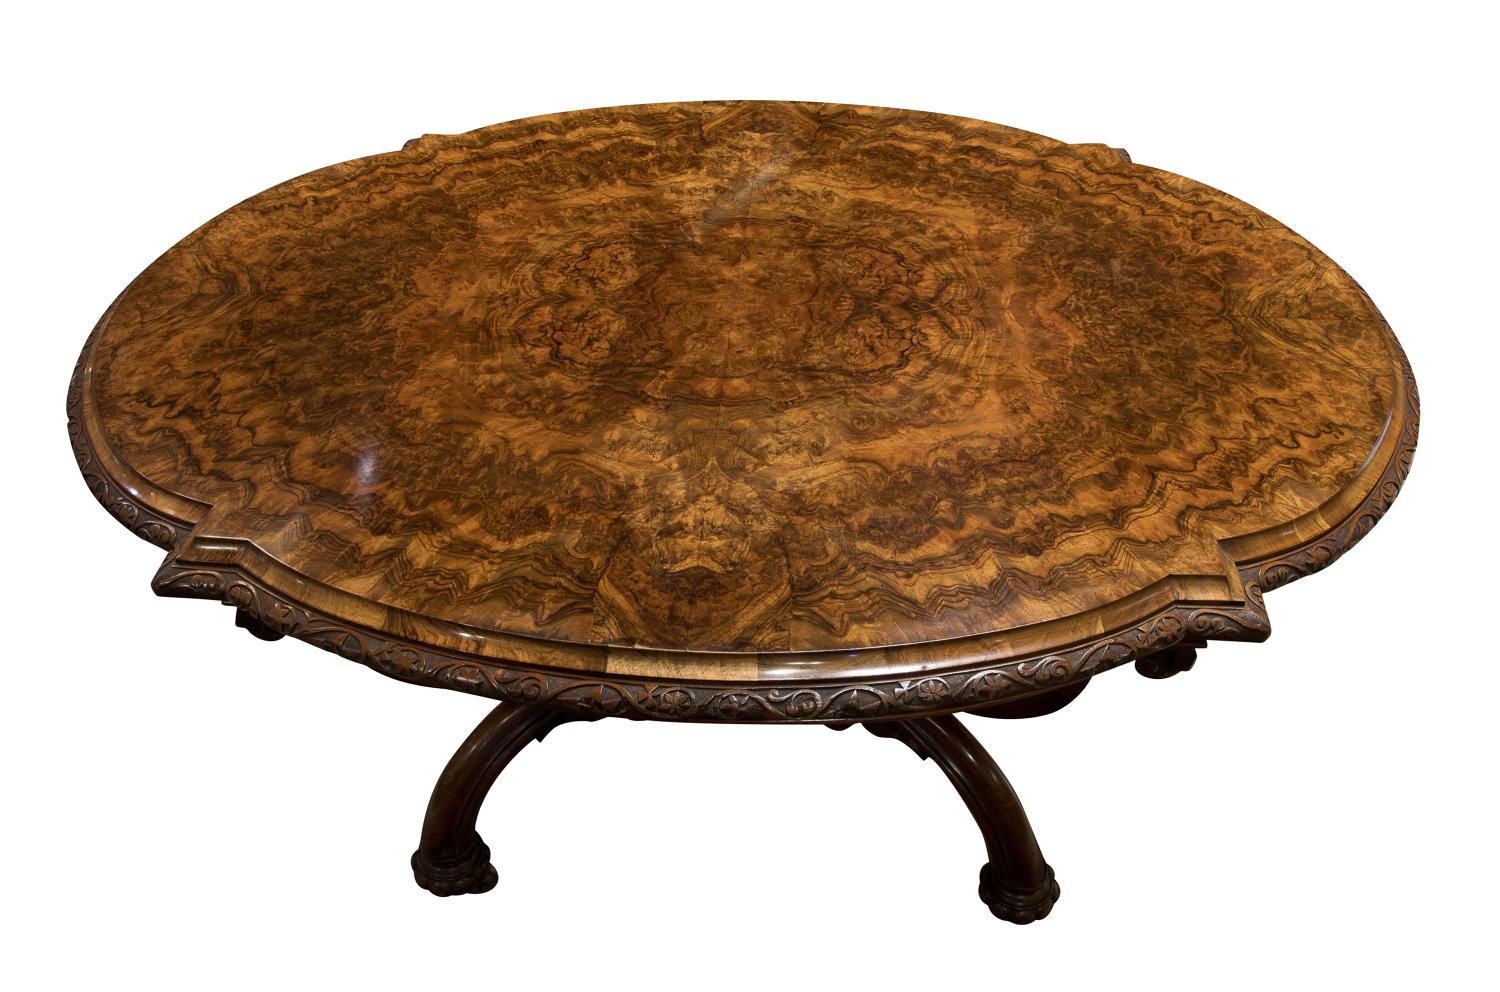 An exceptional quality walnut and burr walnut centre table with a carved basked shaped base. Well carved border to the top and embellishments to the base on brass castors. This is a beautiful and unusual table,

circa 1860.